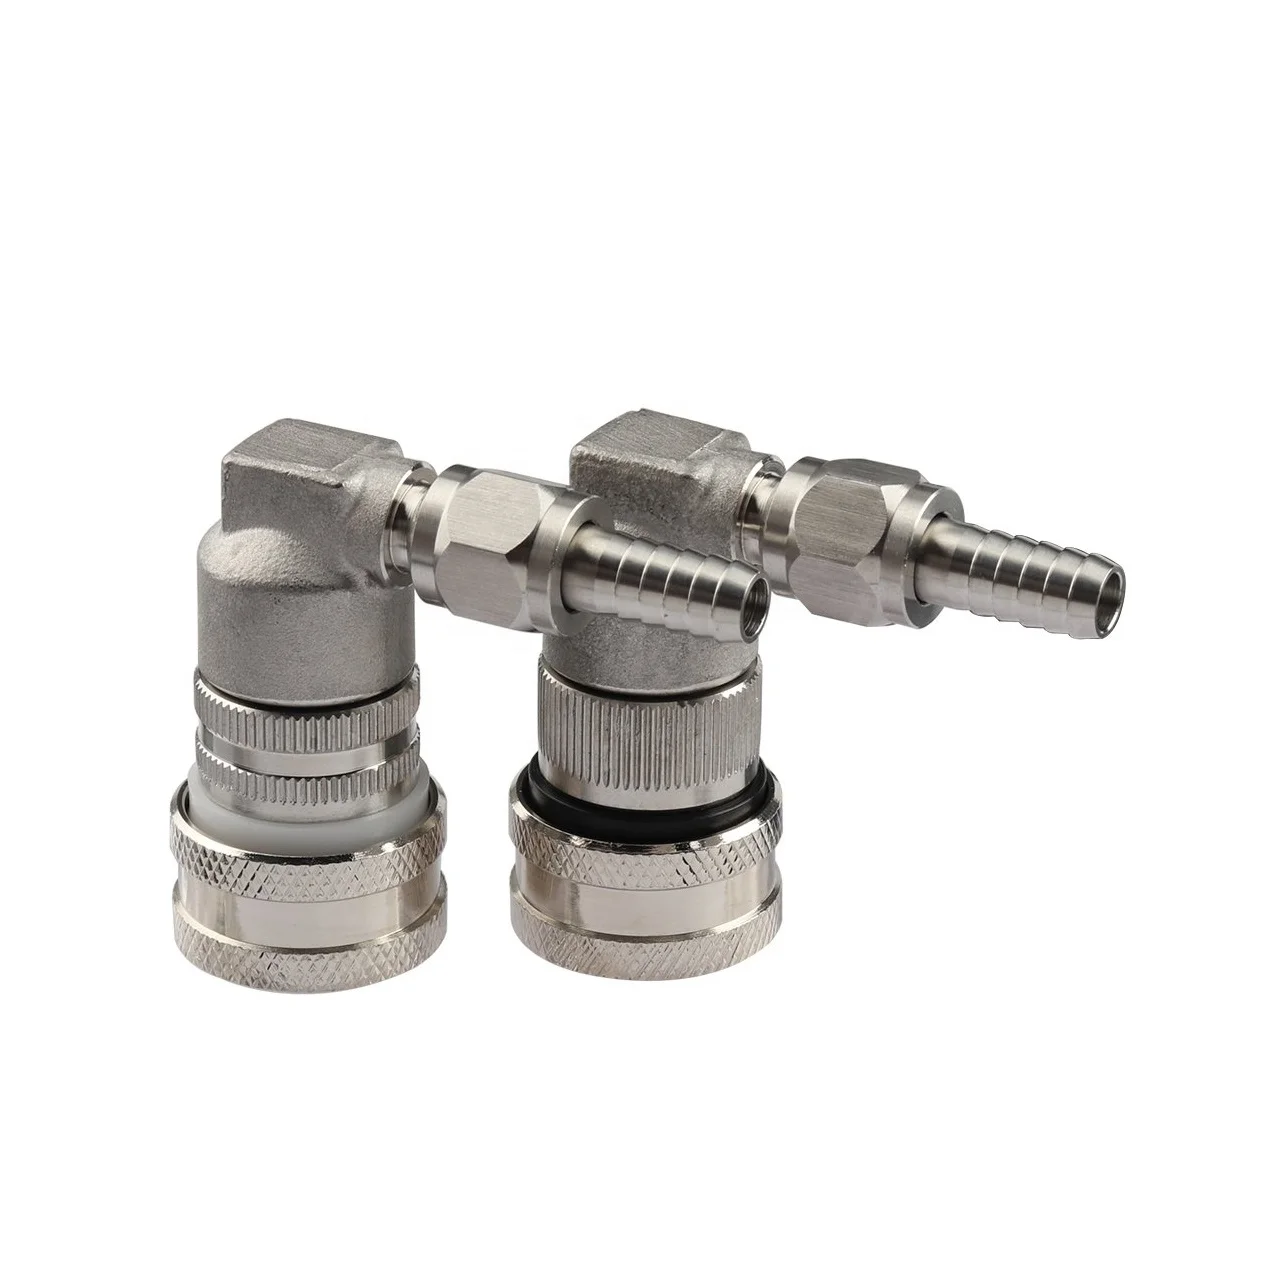 

Homebrew Stainless Steel Ball Lock Keg Disconnect Set Fittings